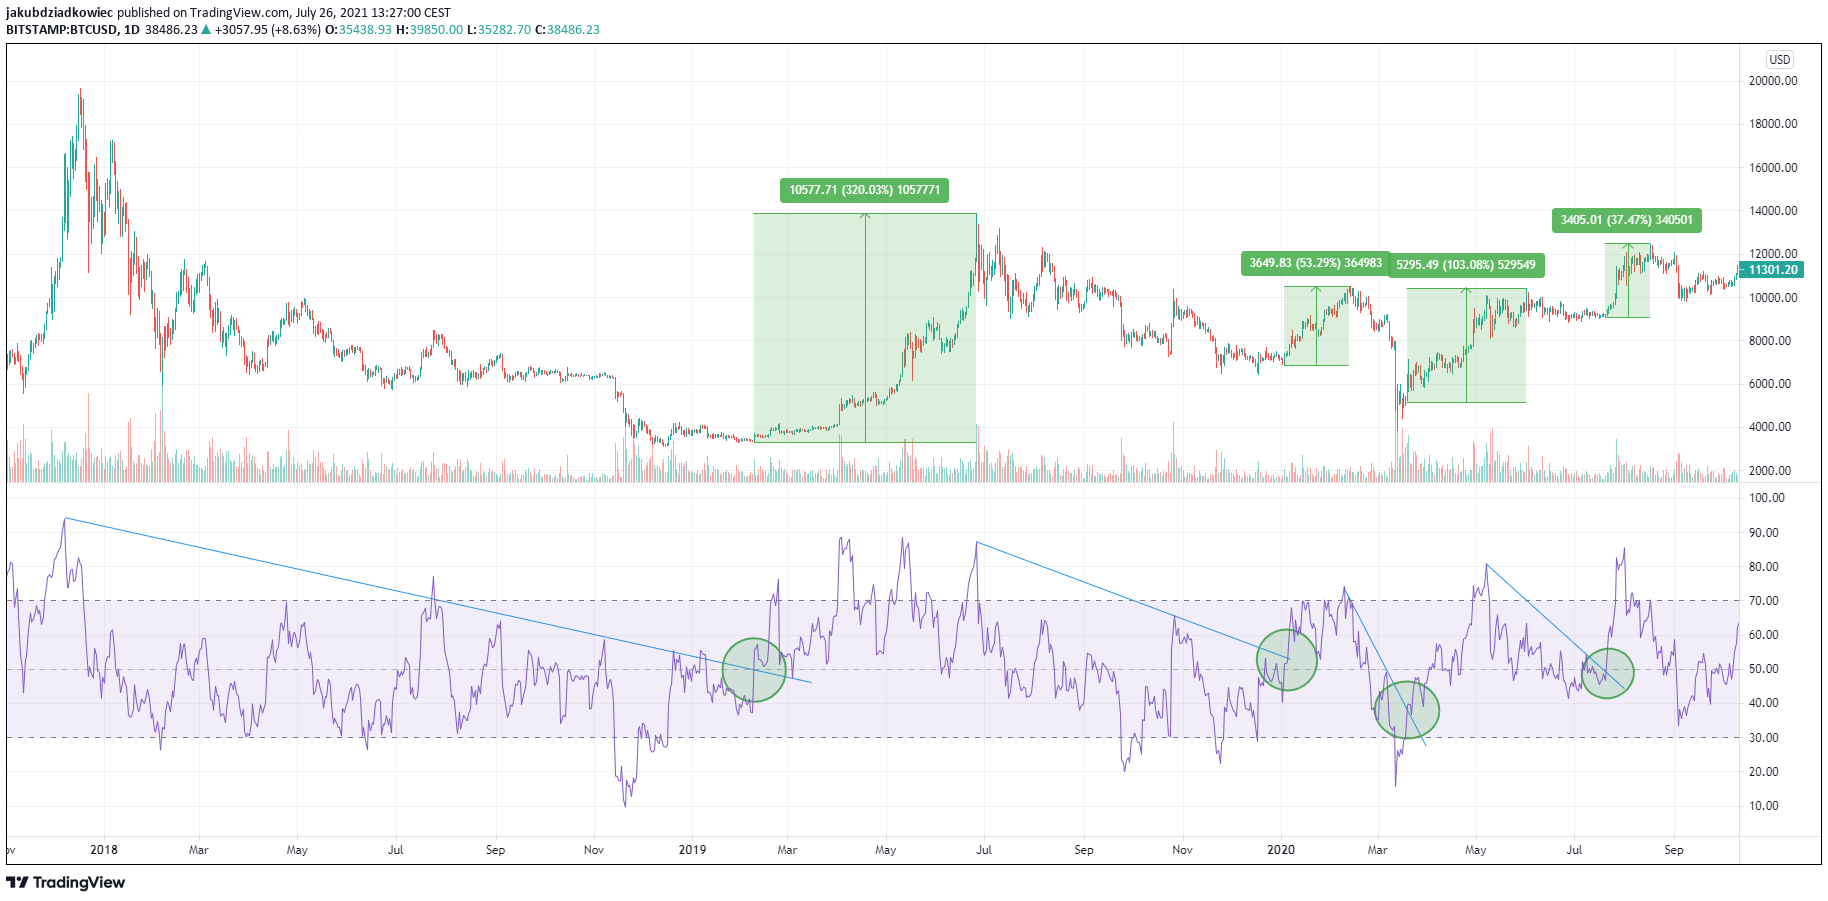 BTC’s RSI Breaks Out of 6-Month Downtrend